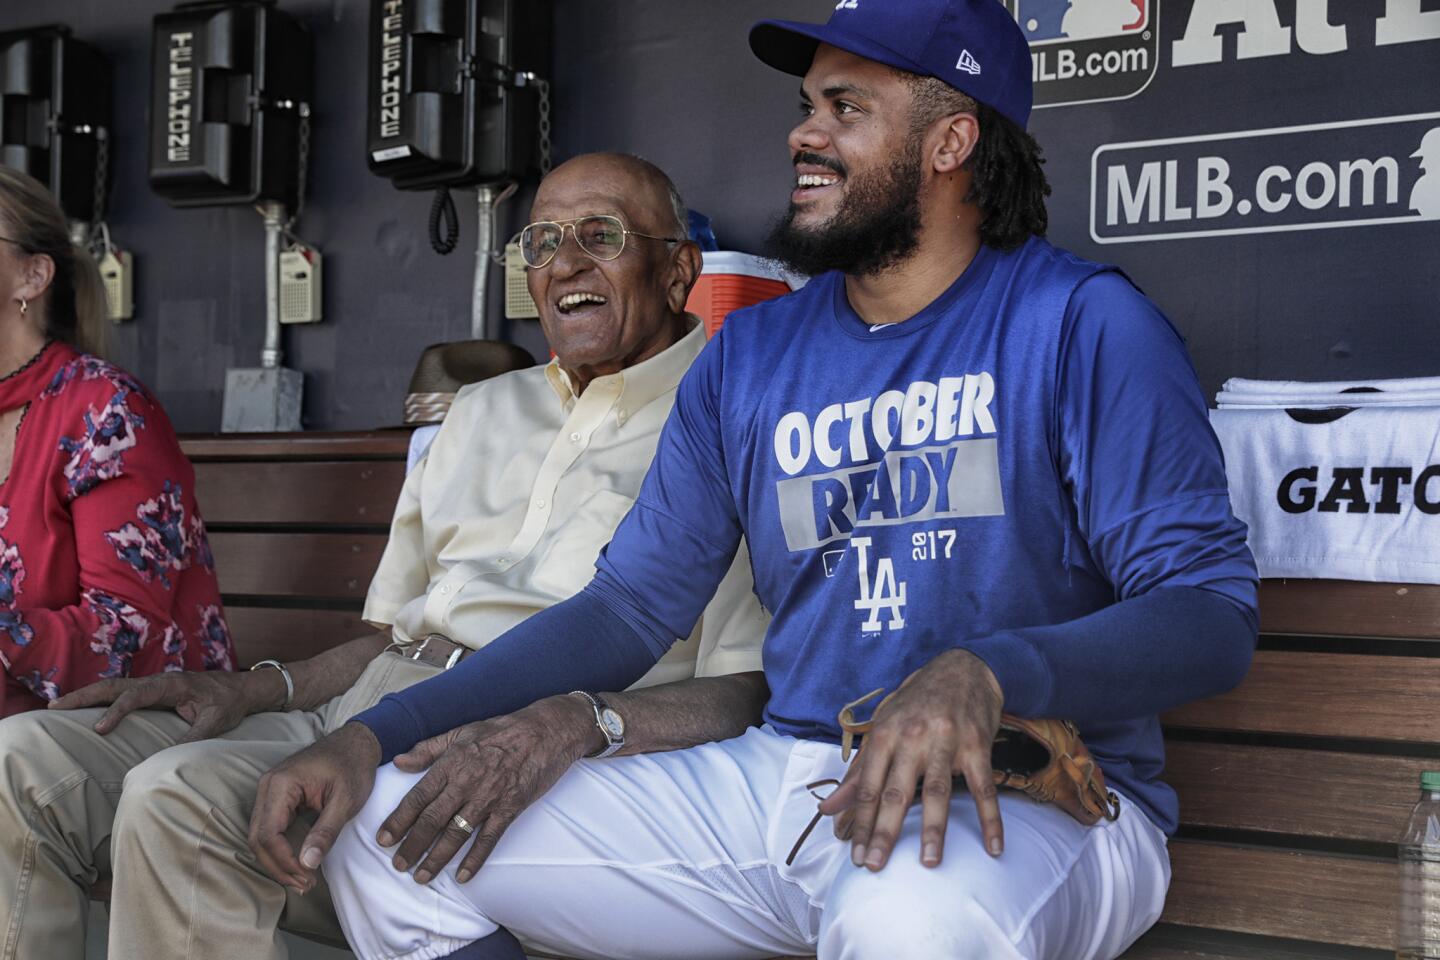 Don Newcombe | 1926 – 2019